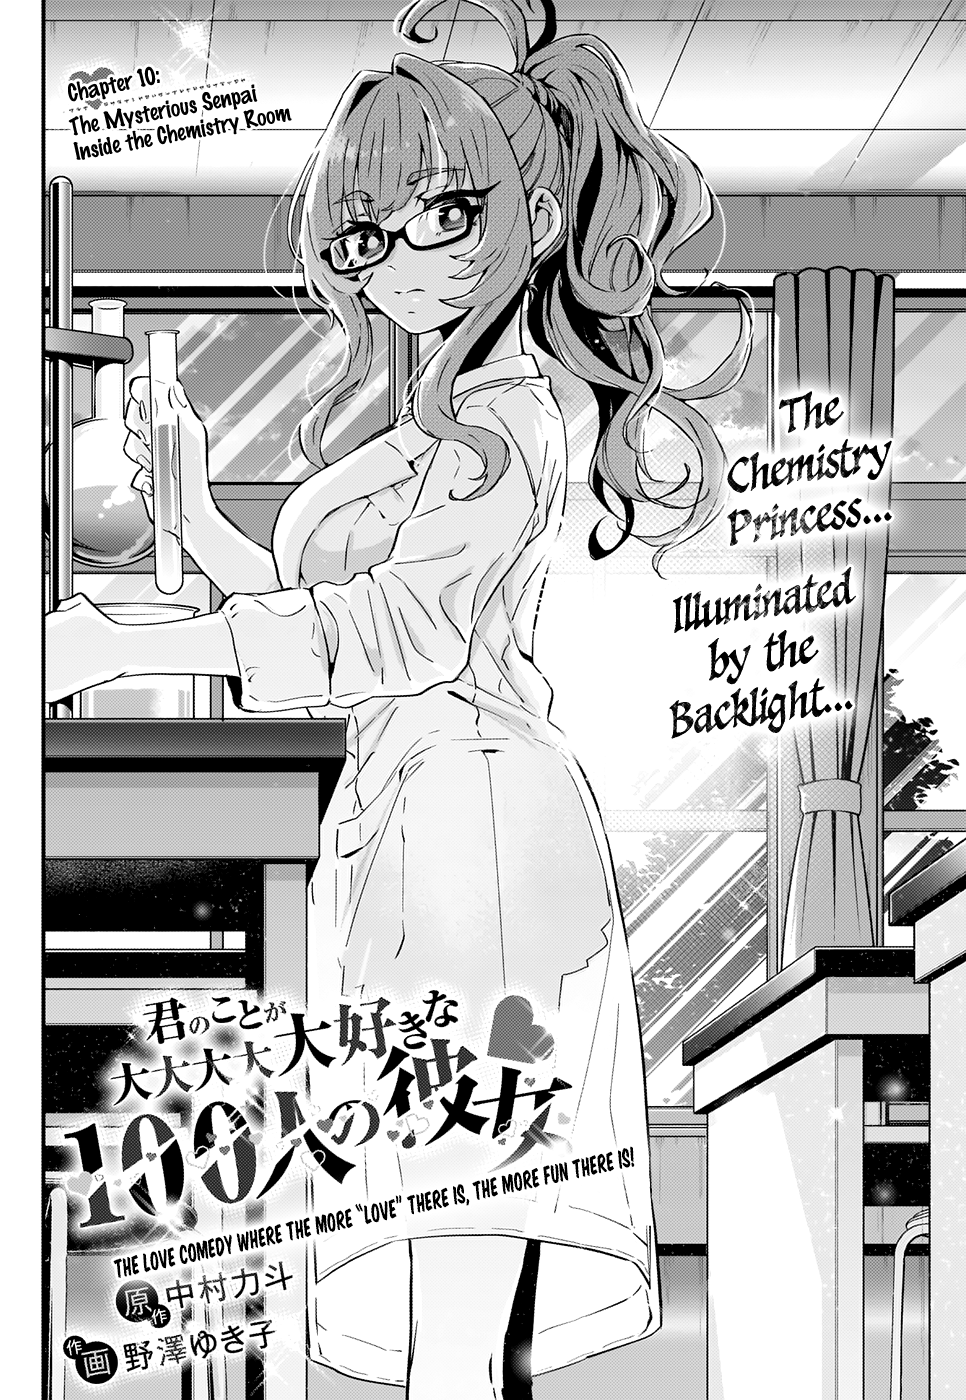 The 100 Girlfriends Who Really, Really, Really, Really, Really Love You Chapter 10: The Mysterious Senpai Inside The Chemistry Room - Picture 3